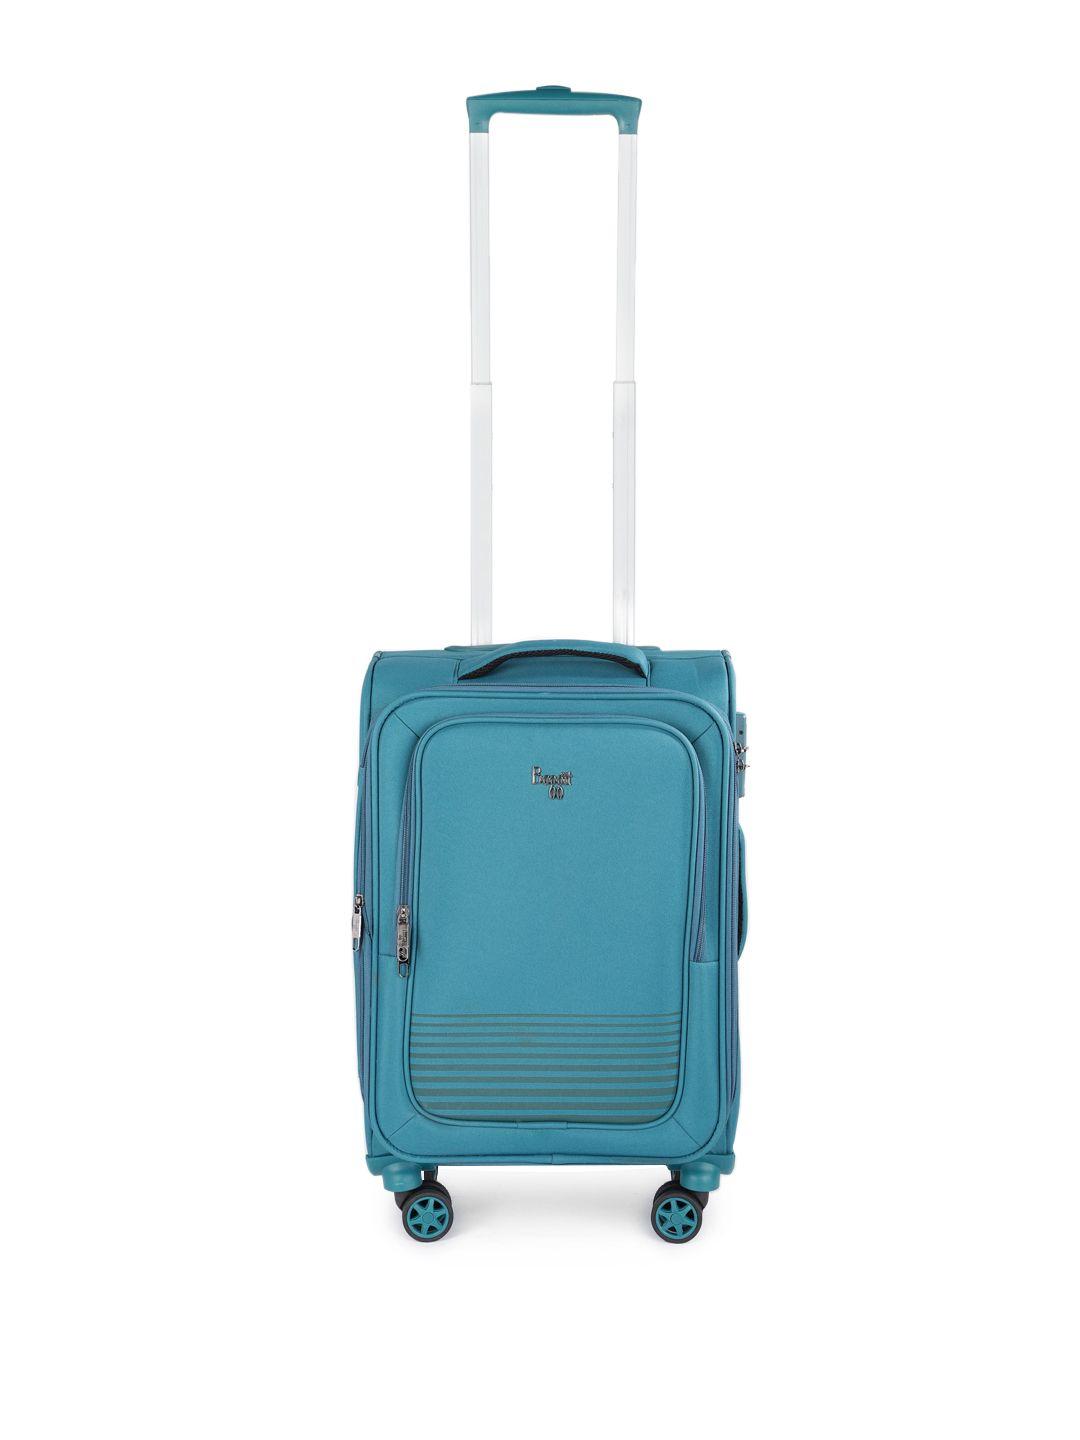 baggit viber striped soft-sided cabin trolley suitcase